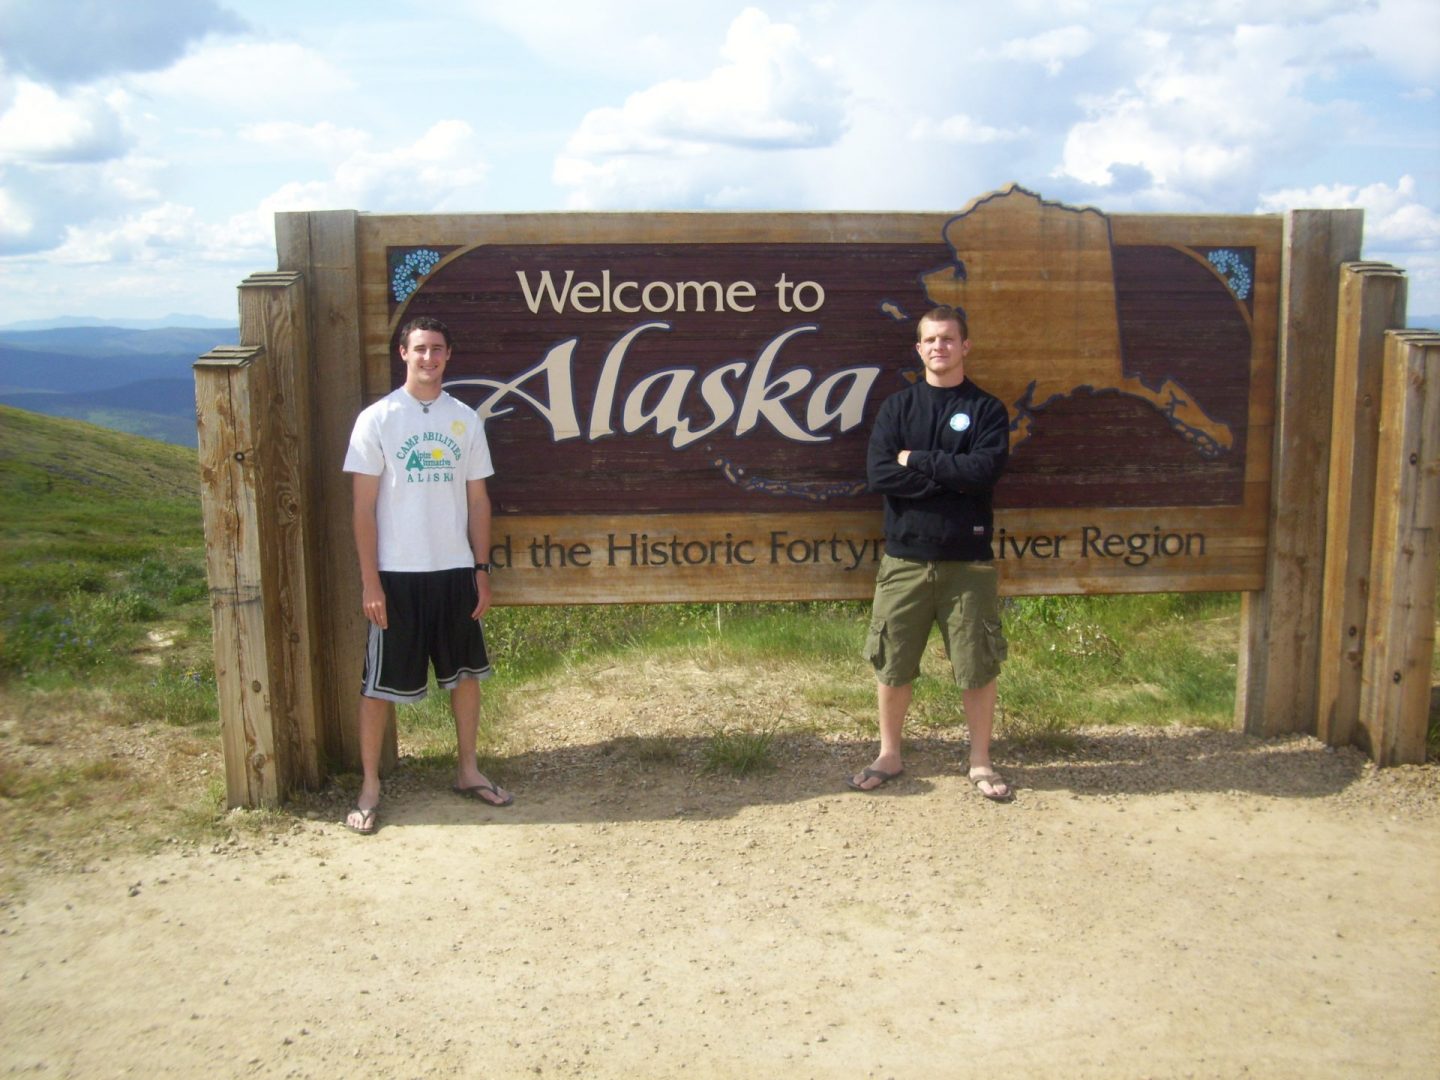 Matt and Justin posing in front of a sign that says "Welcome to Alaska". Blue sky and green mountains in the background.